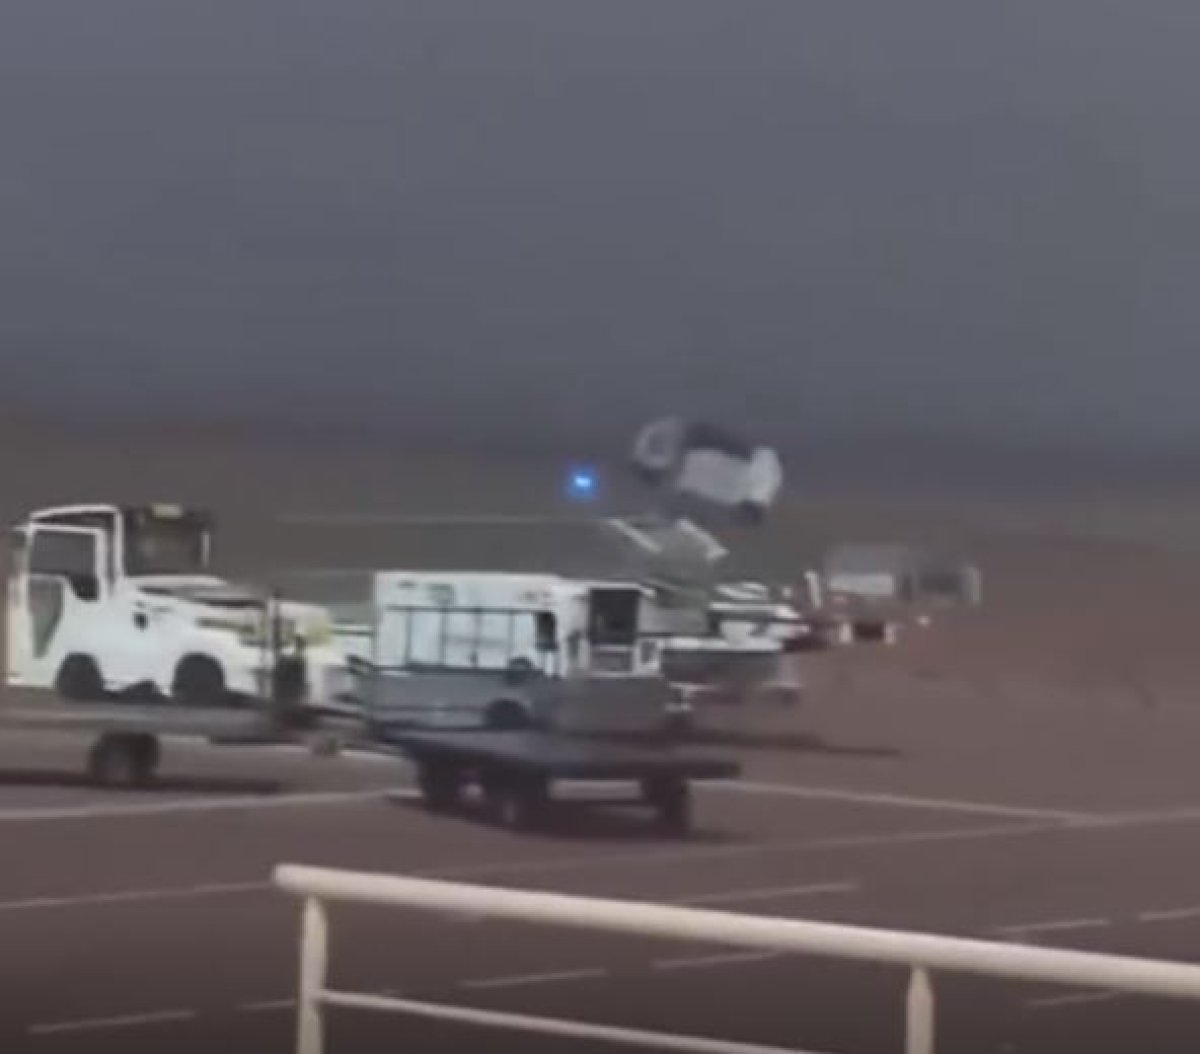 The storm in France caused chaos at the airport #2